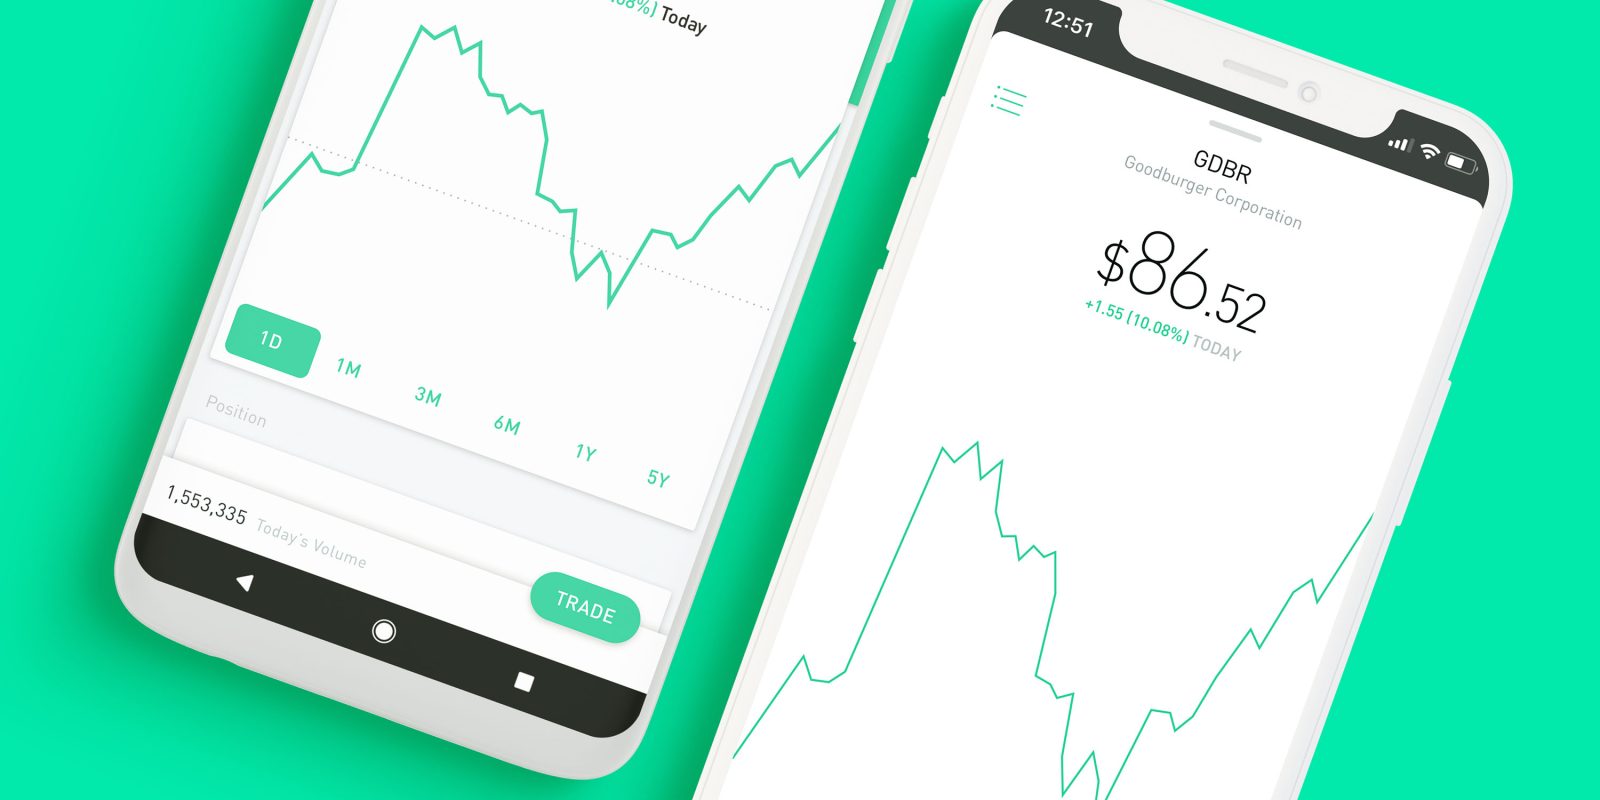 You can sell GME in Robinhood but not buy it